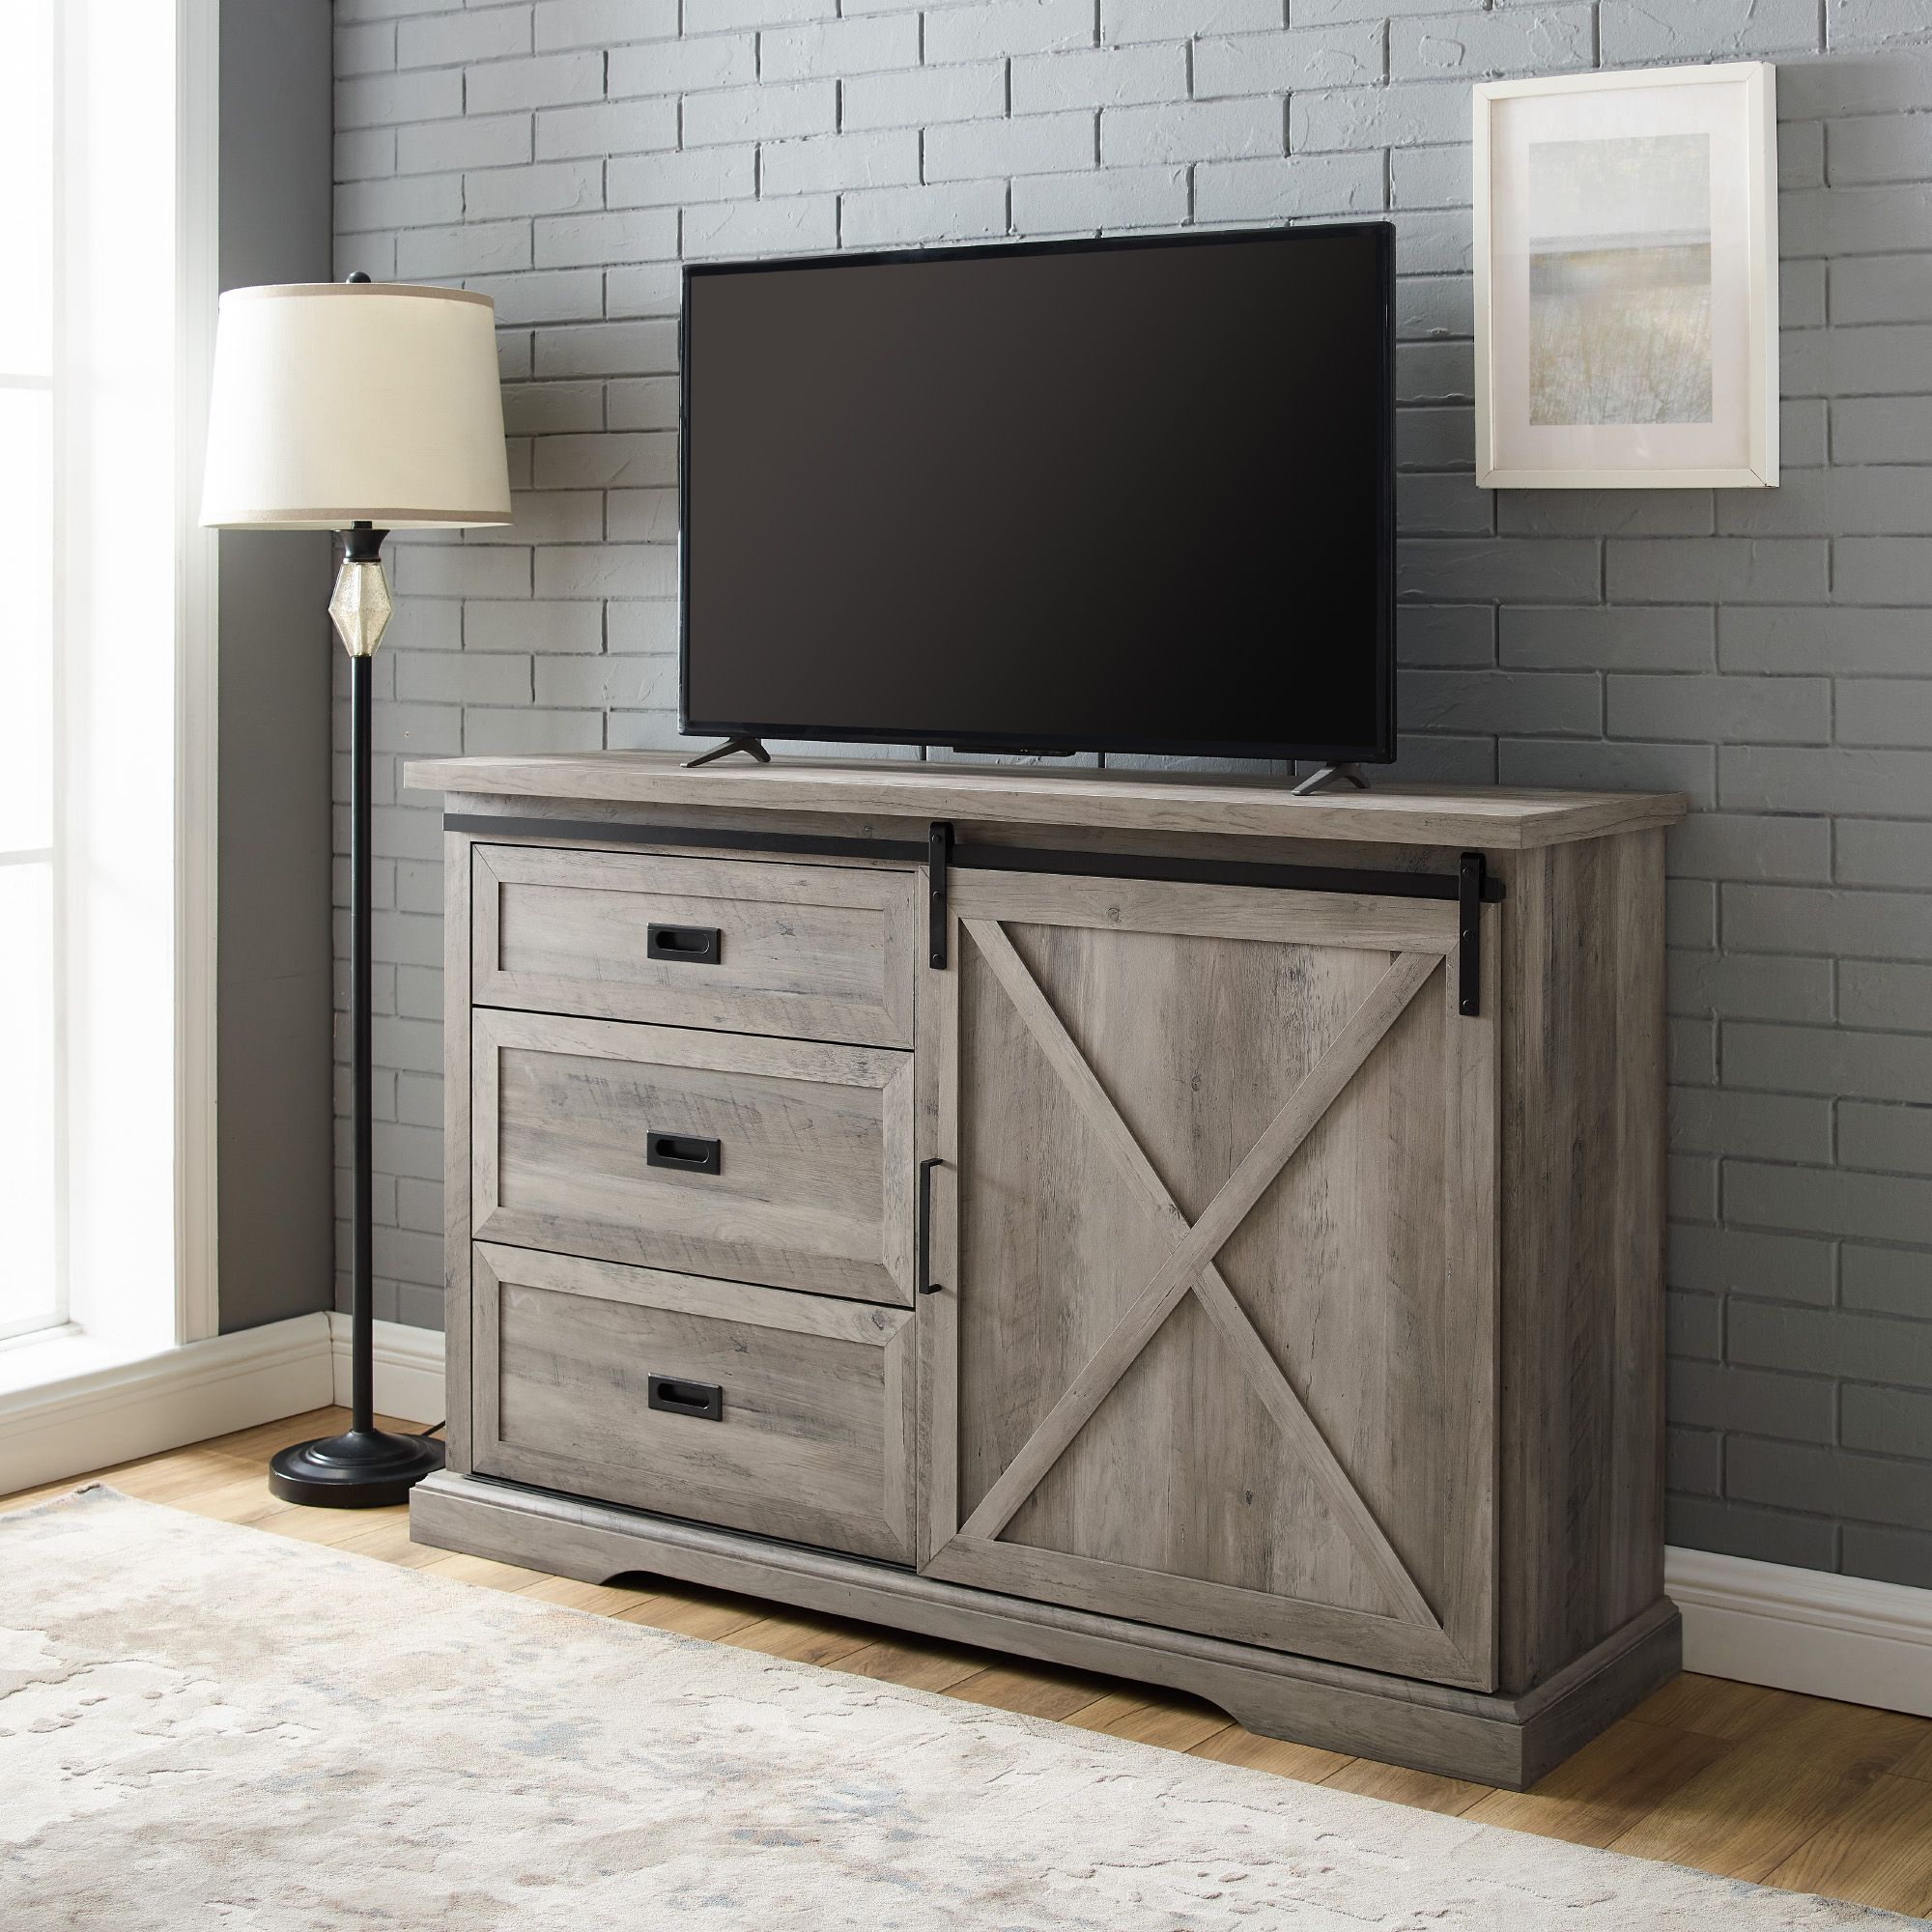 Camden Corner Tv Stands For Tvs Up To 60" For Favorite Manor Park Sliding Door Tv Stand For Tvs Up To 60", Grey (View 10 of 10)